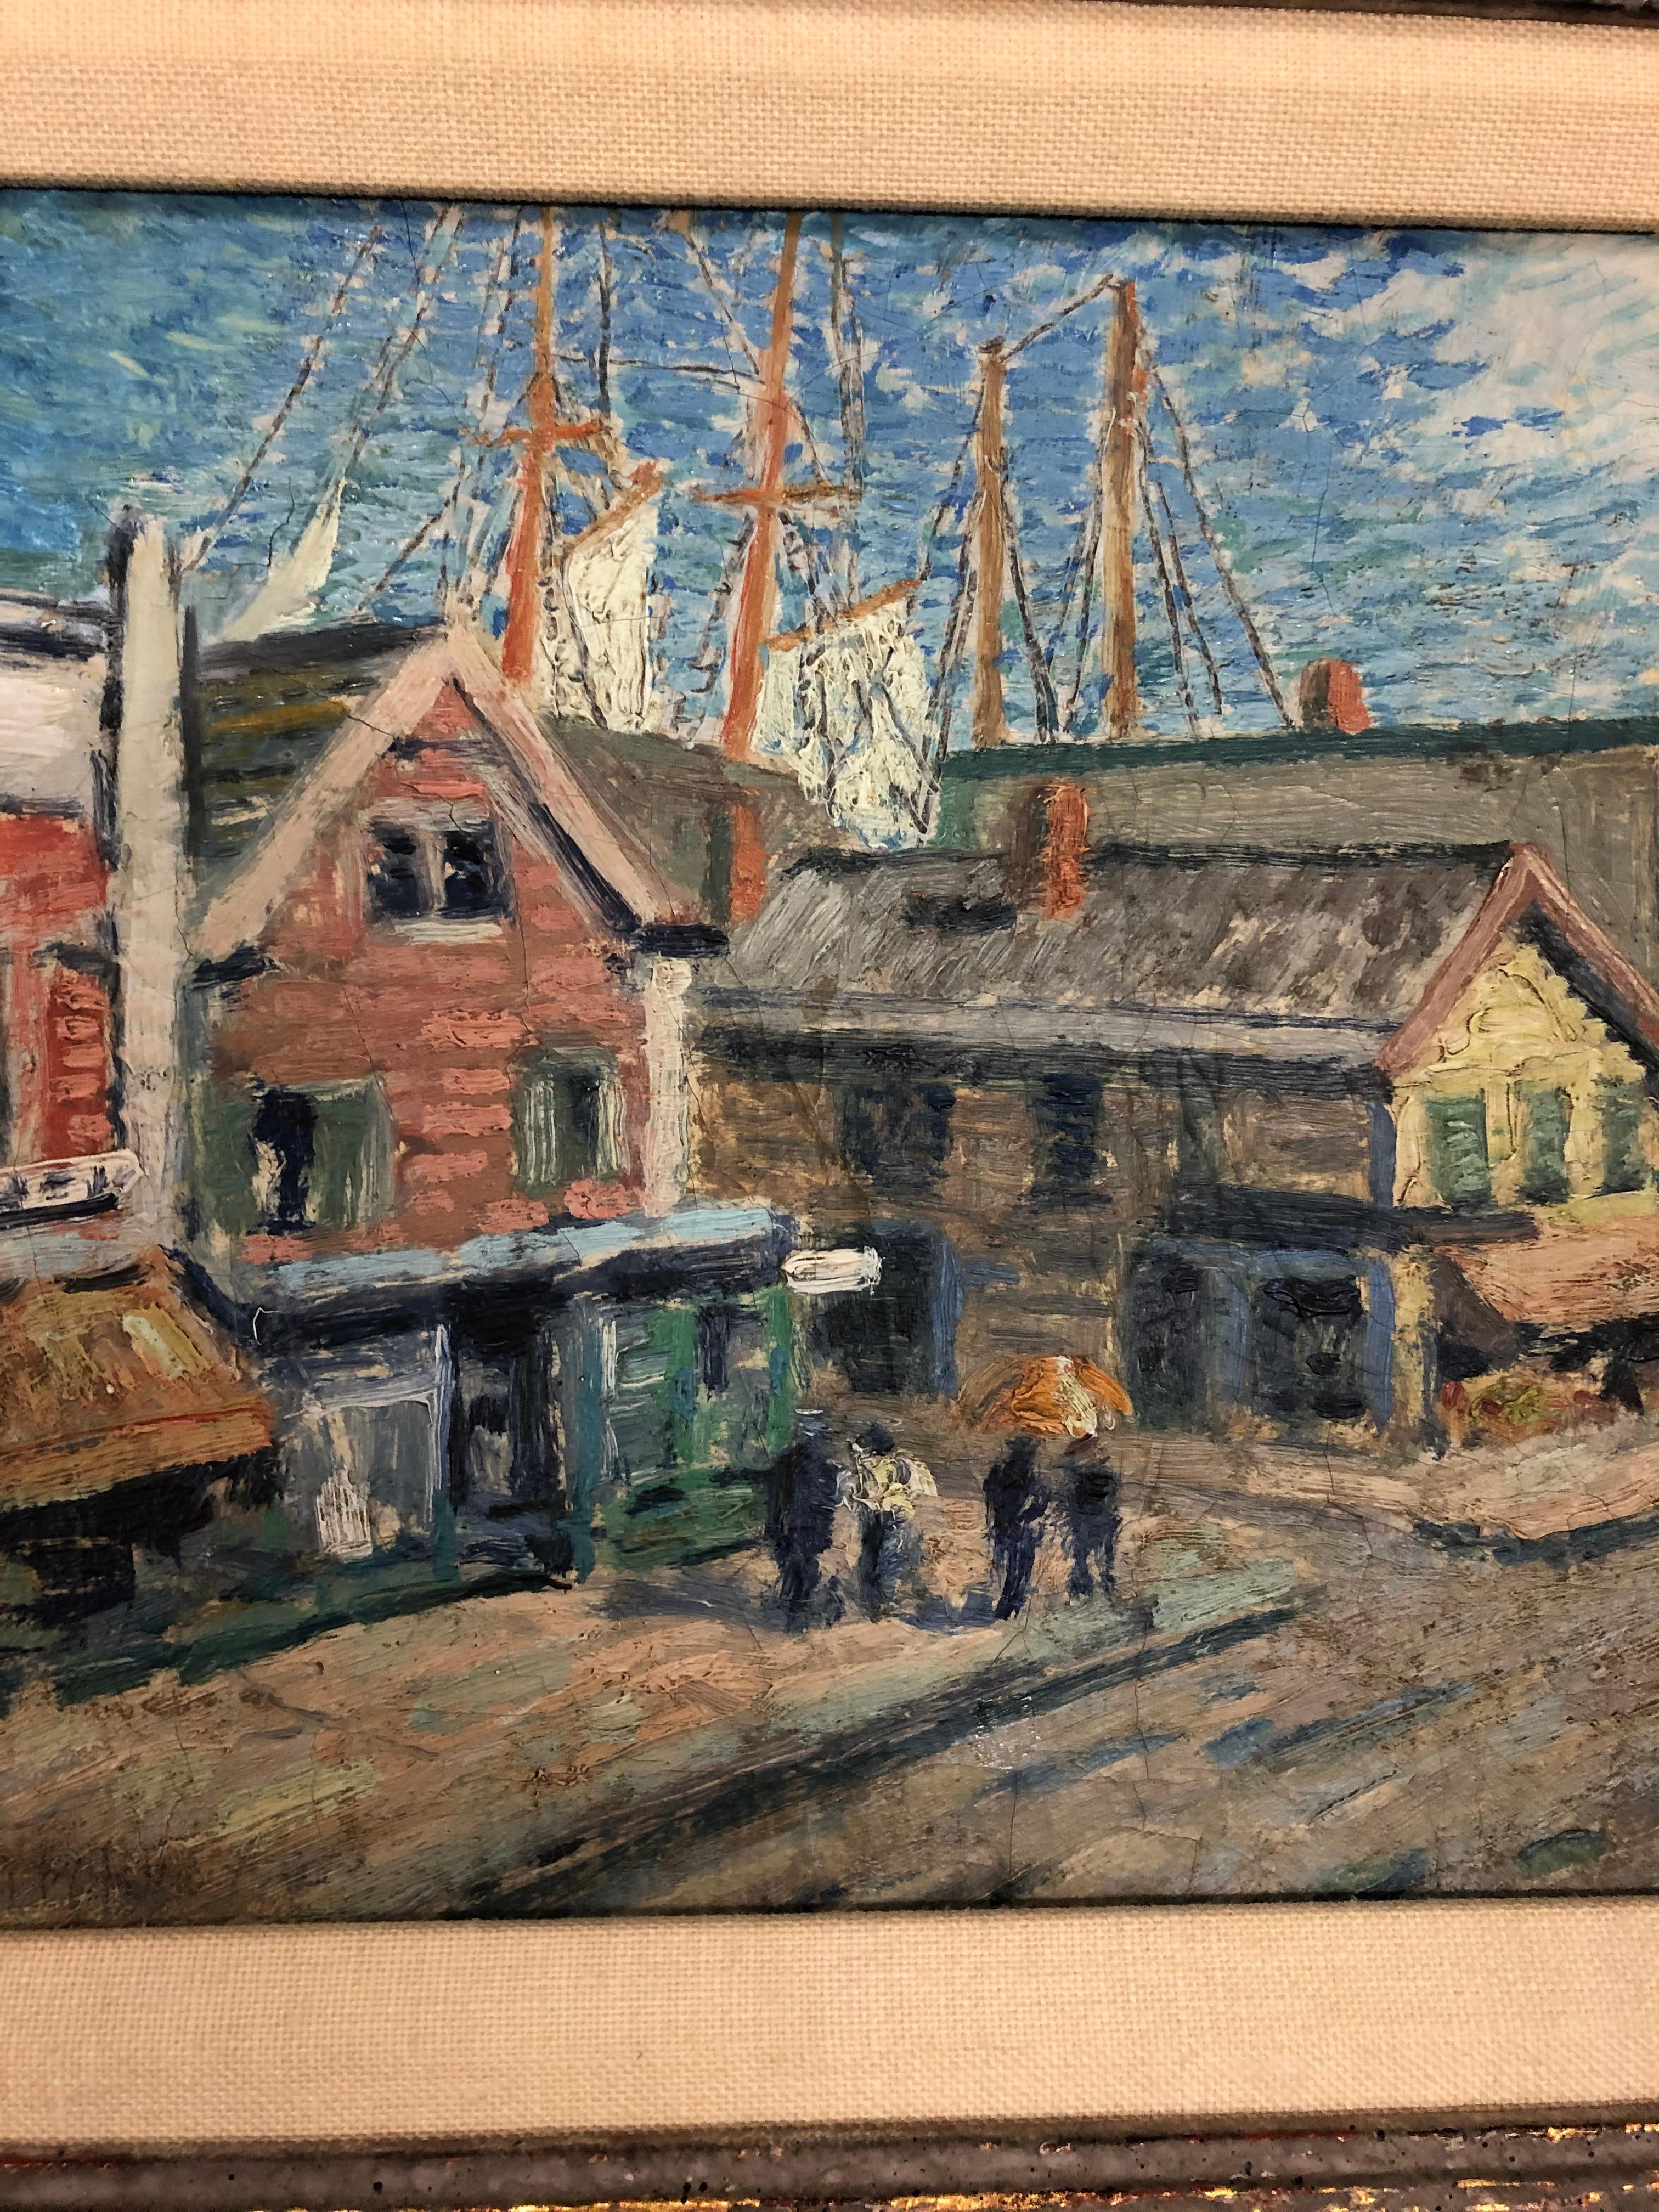 Whitney Myron Hubbard: 1875-1965. Well listed American artist who lived and painted mostly in the town of Greenport L.I.. He has auction records over $6500. He studied at the Art Students League. He exhibited at the National Academy of Design and